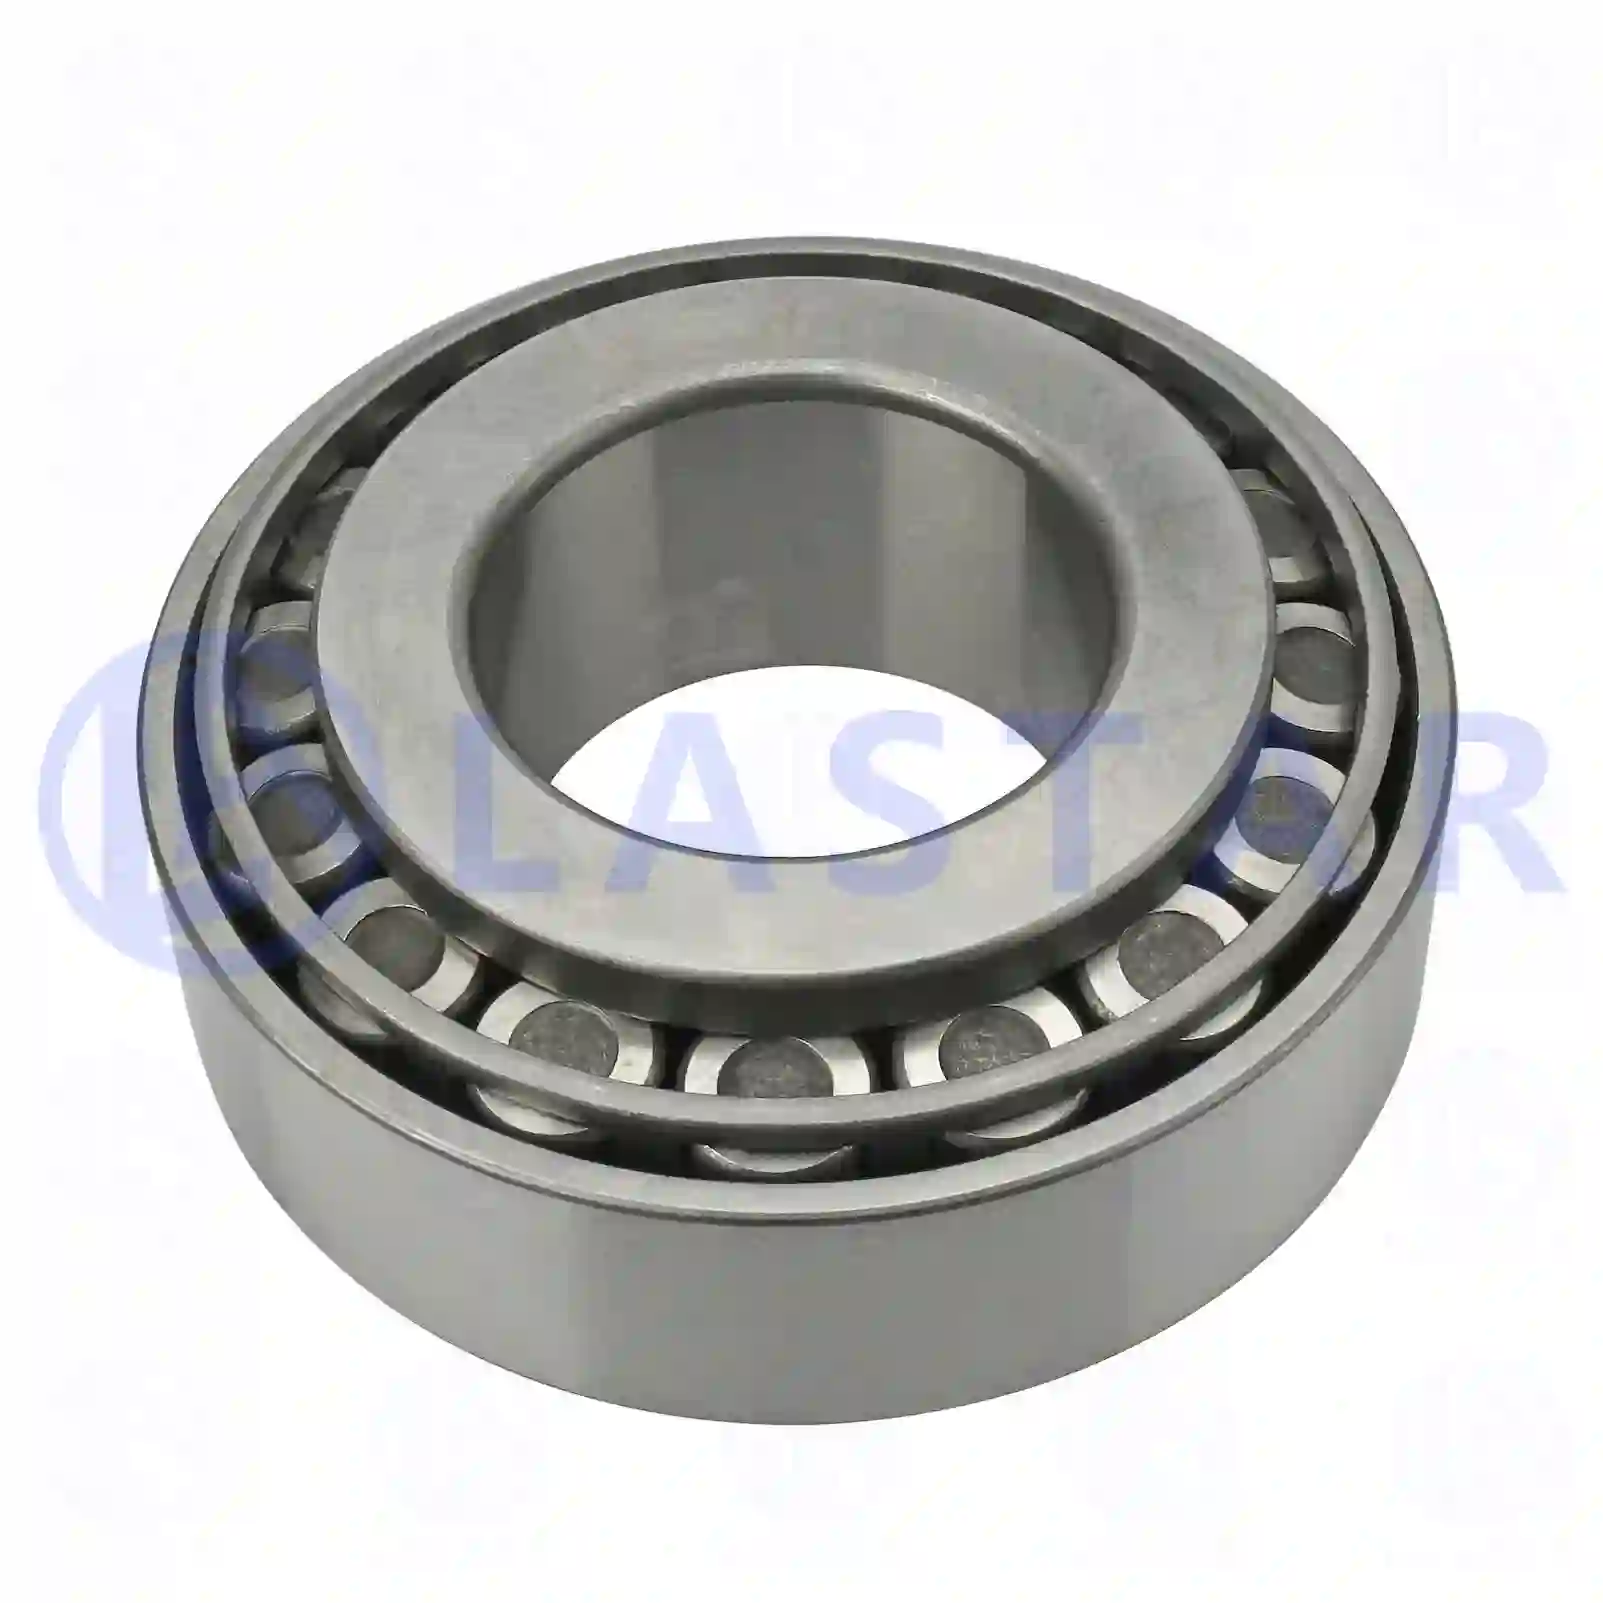 Balance Arm, Trunnion Tapered roller bearing, la no: 77731446 ,  oem no:4200003500, 123629, Lastar Spare Part | Truck Spare Parts, Auotomotive Spare Parts